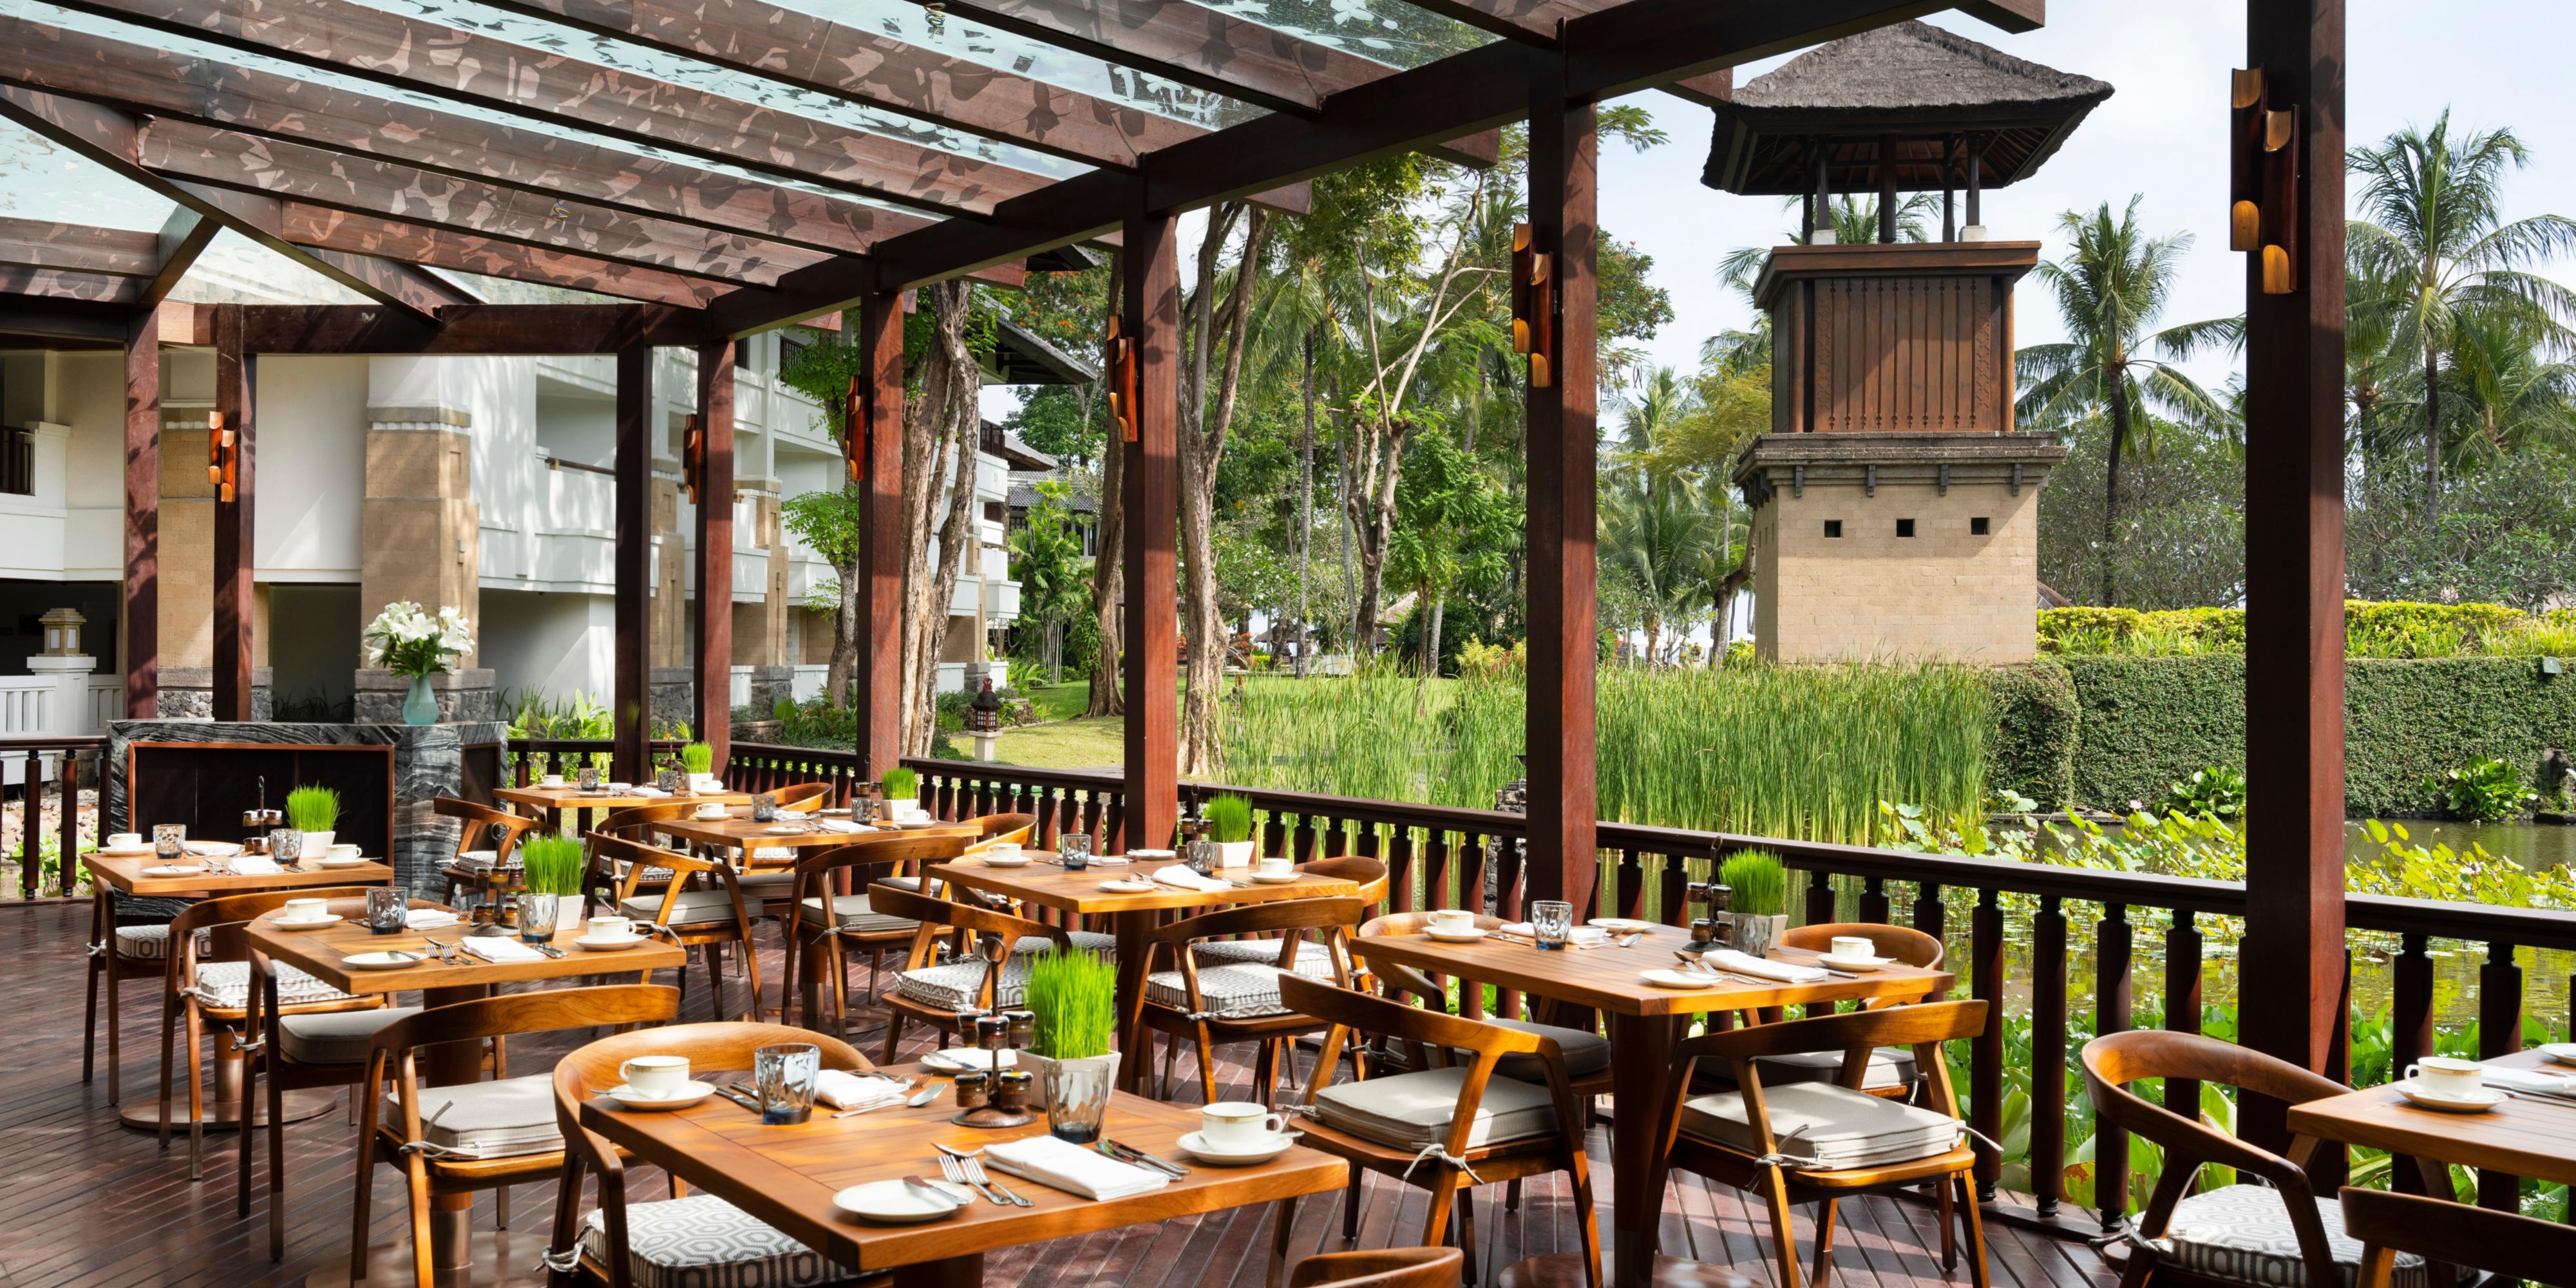 Indonesian, local Balinese, Italian, and Japanese are part of the InterContinental Bali Resort dining experience. Choose a four-course tasting menu at Bella Cucina, or opt for regional Balinese specialties at Jimbaran Gardens. 